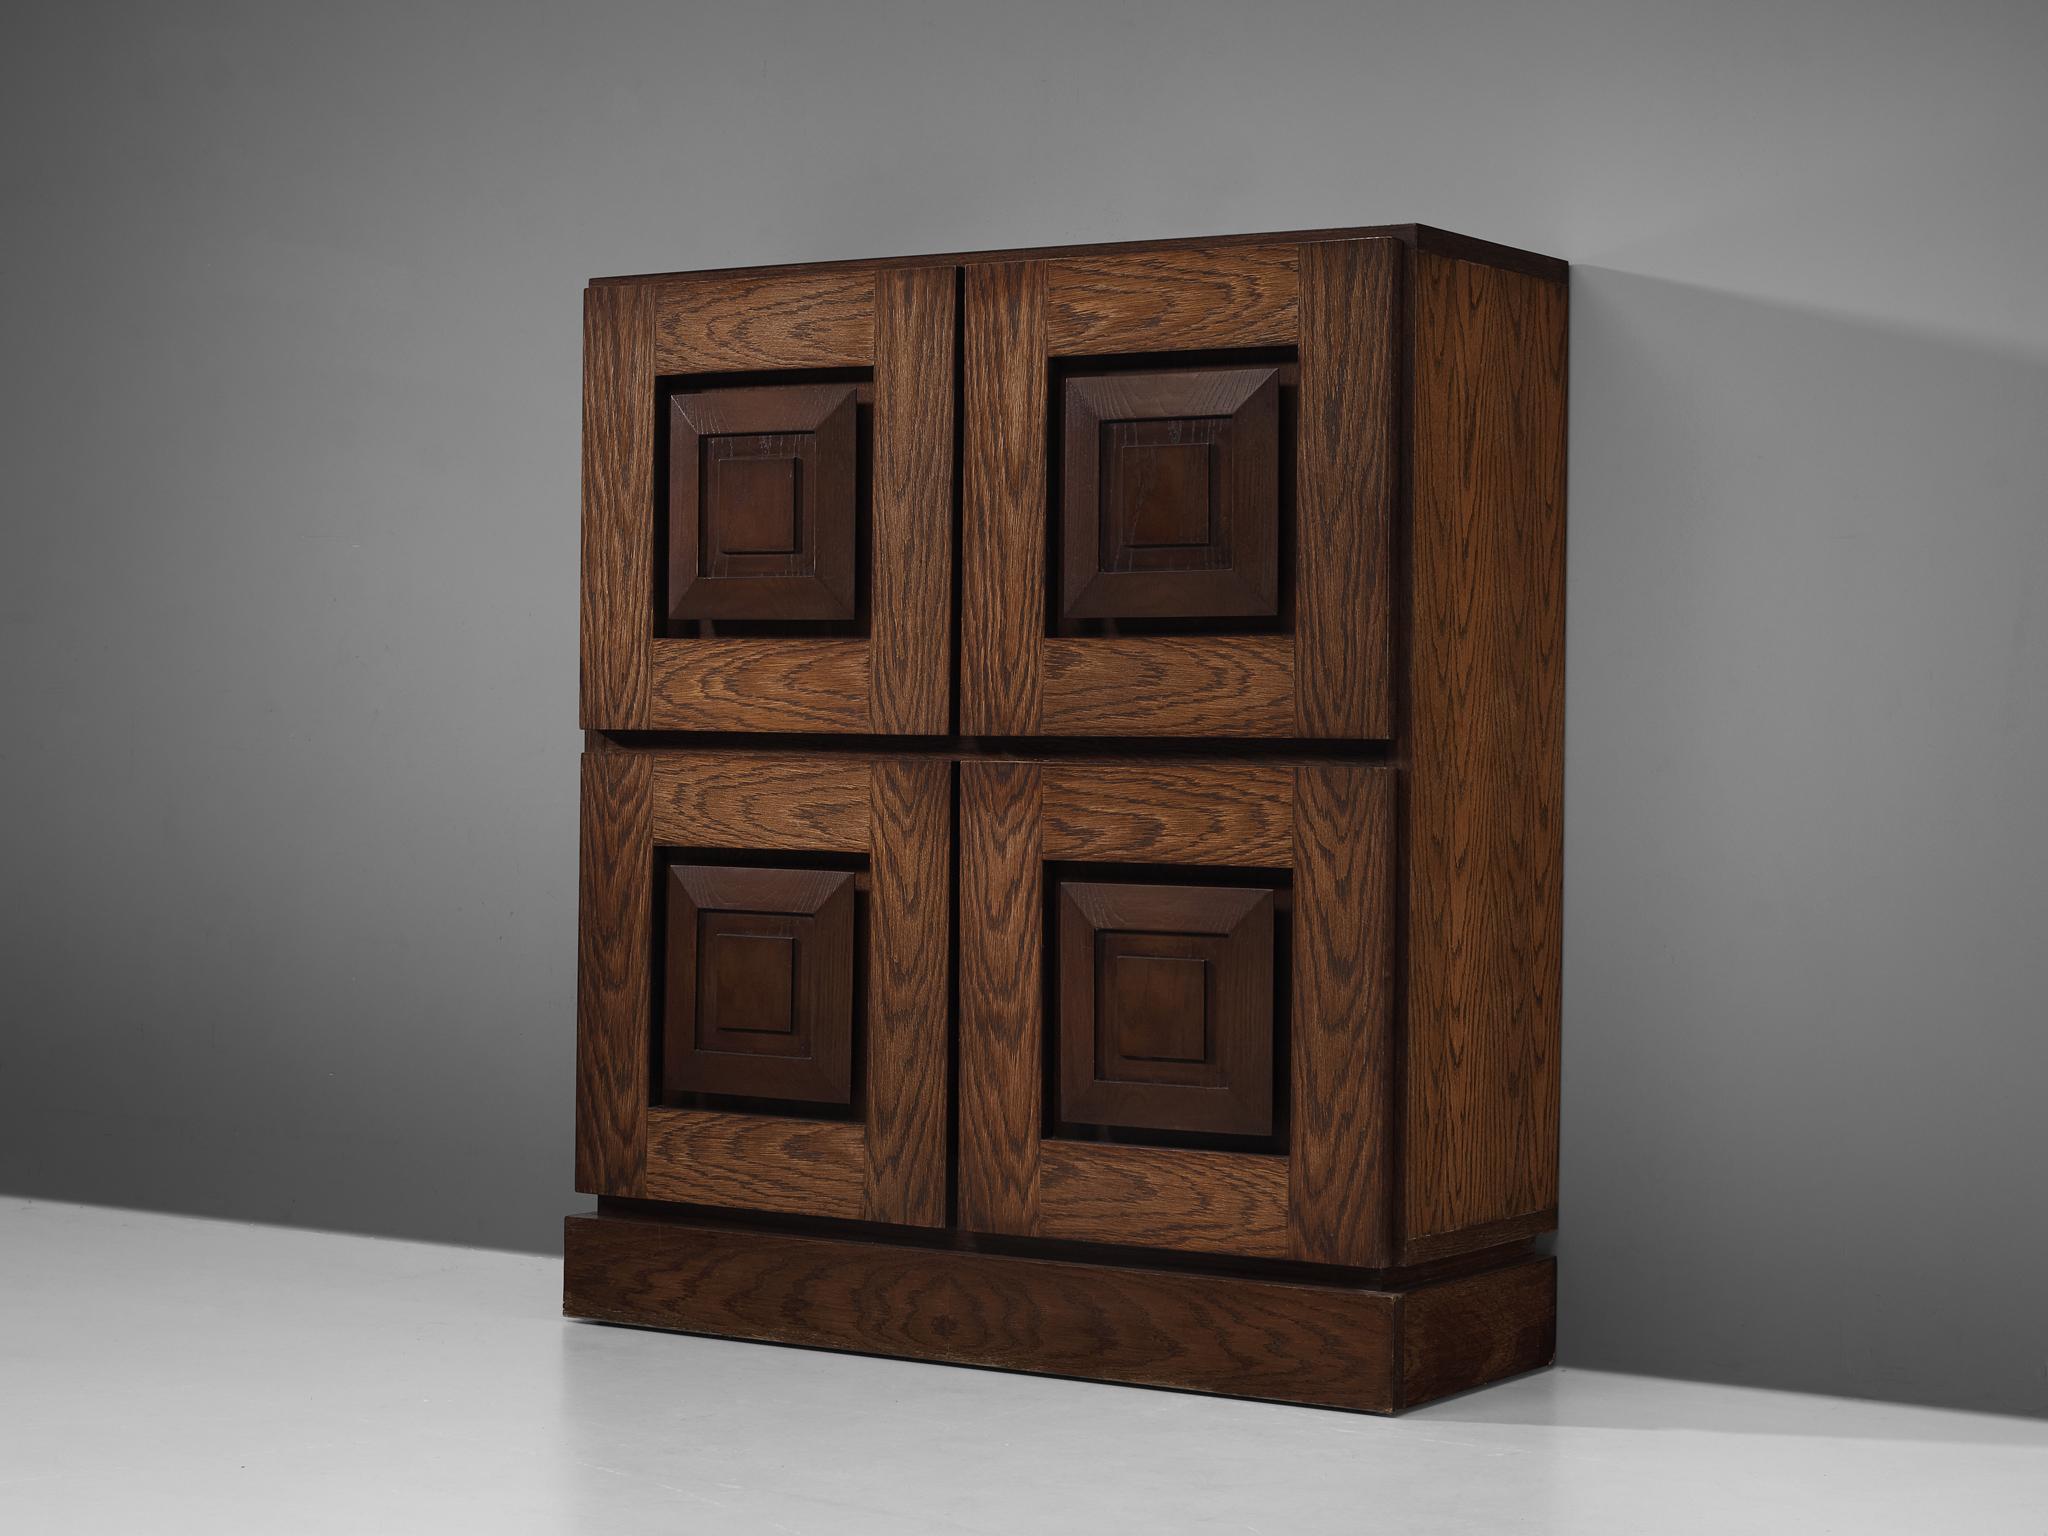 Cabinet, solid oak, Belgium, 1970s

This cabinet features a clear rhythm and flow established by means of a well thought through lay out that is utterly well-balanced. The carved square door panels immediately catch the eye and are the signature for